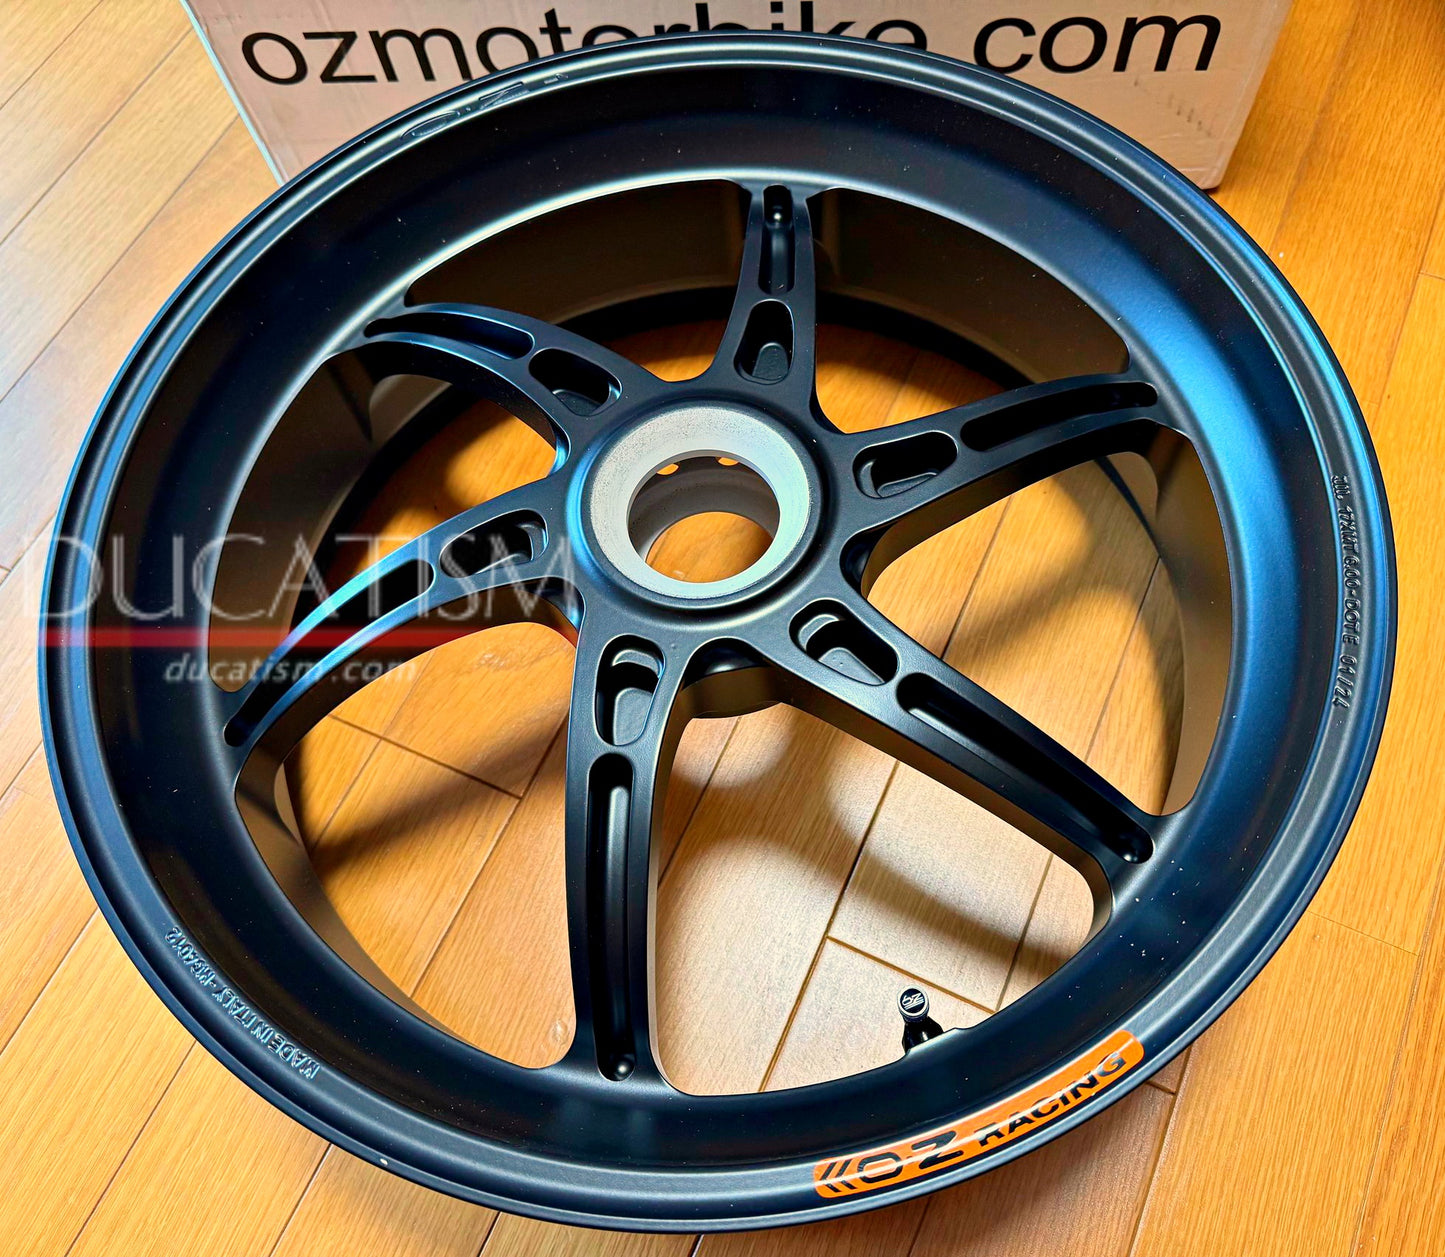 DUCATI Panigale V4/V4S/V4R Forged Mag Wheel Made in Italy OZ-Racing Genuine CATTIVA StreetFighterV4 Mag Forged DU102012C-60B